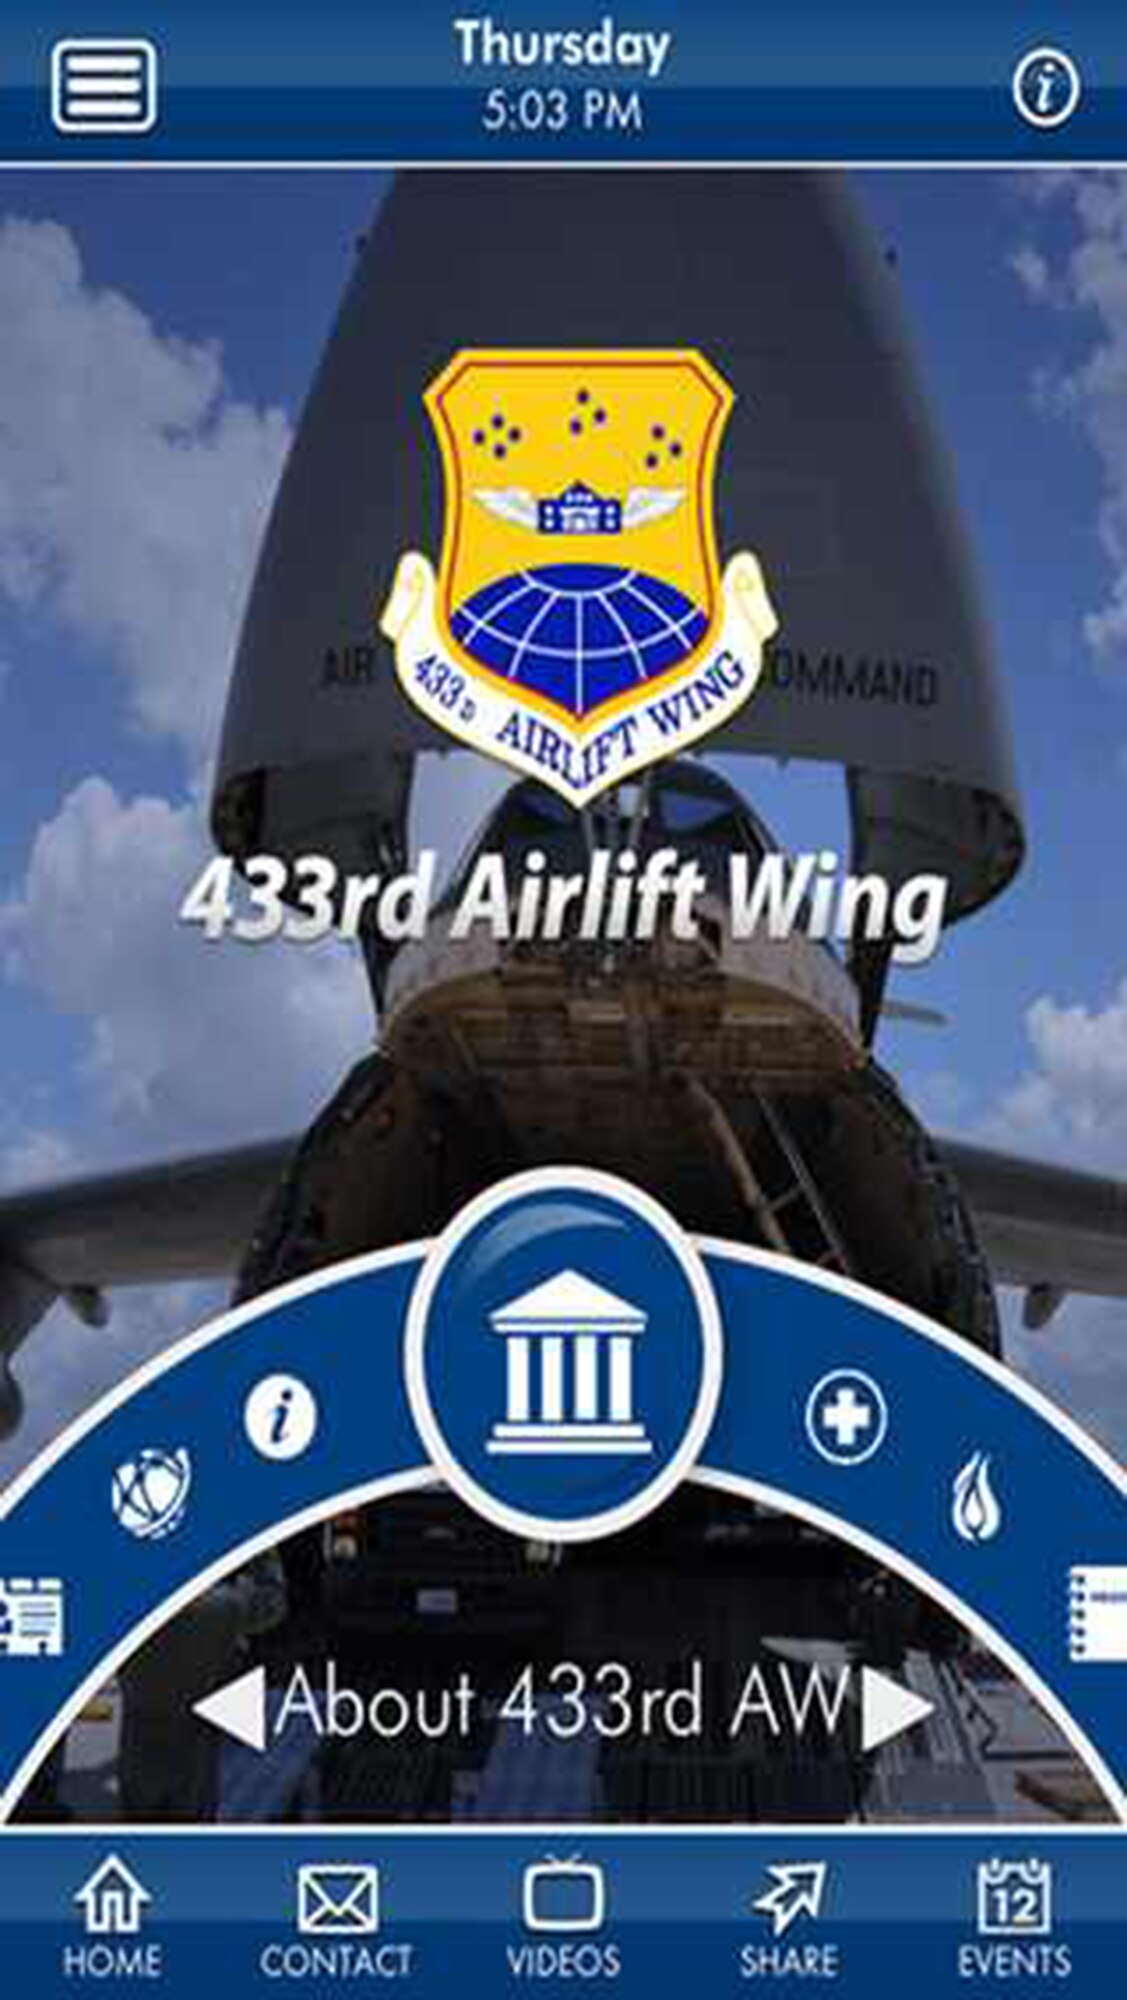 The official 433rd Airlift Wing mobile application is ready for download. The app is available for both iPhone and Android users. (U.S. Air Force photo by Benjamin Faske) (released)